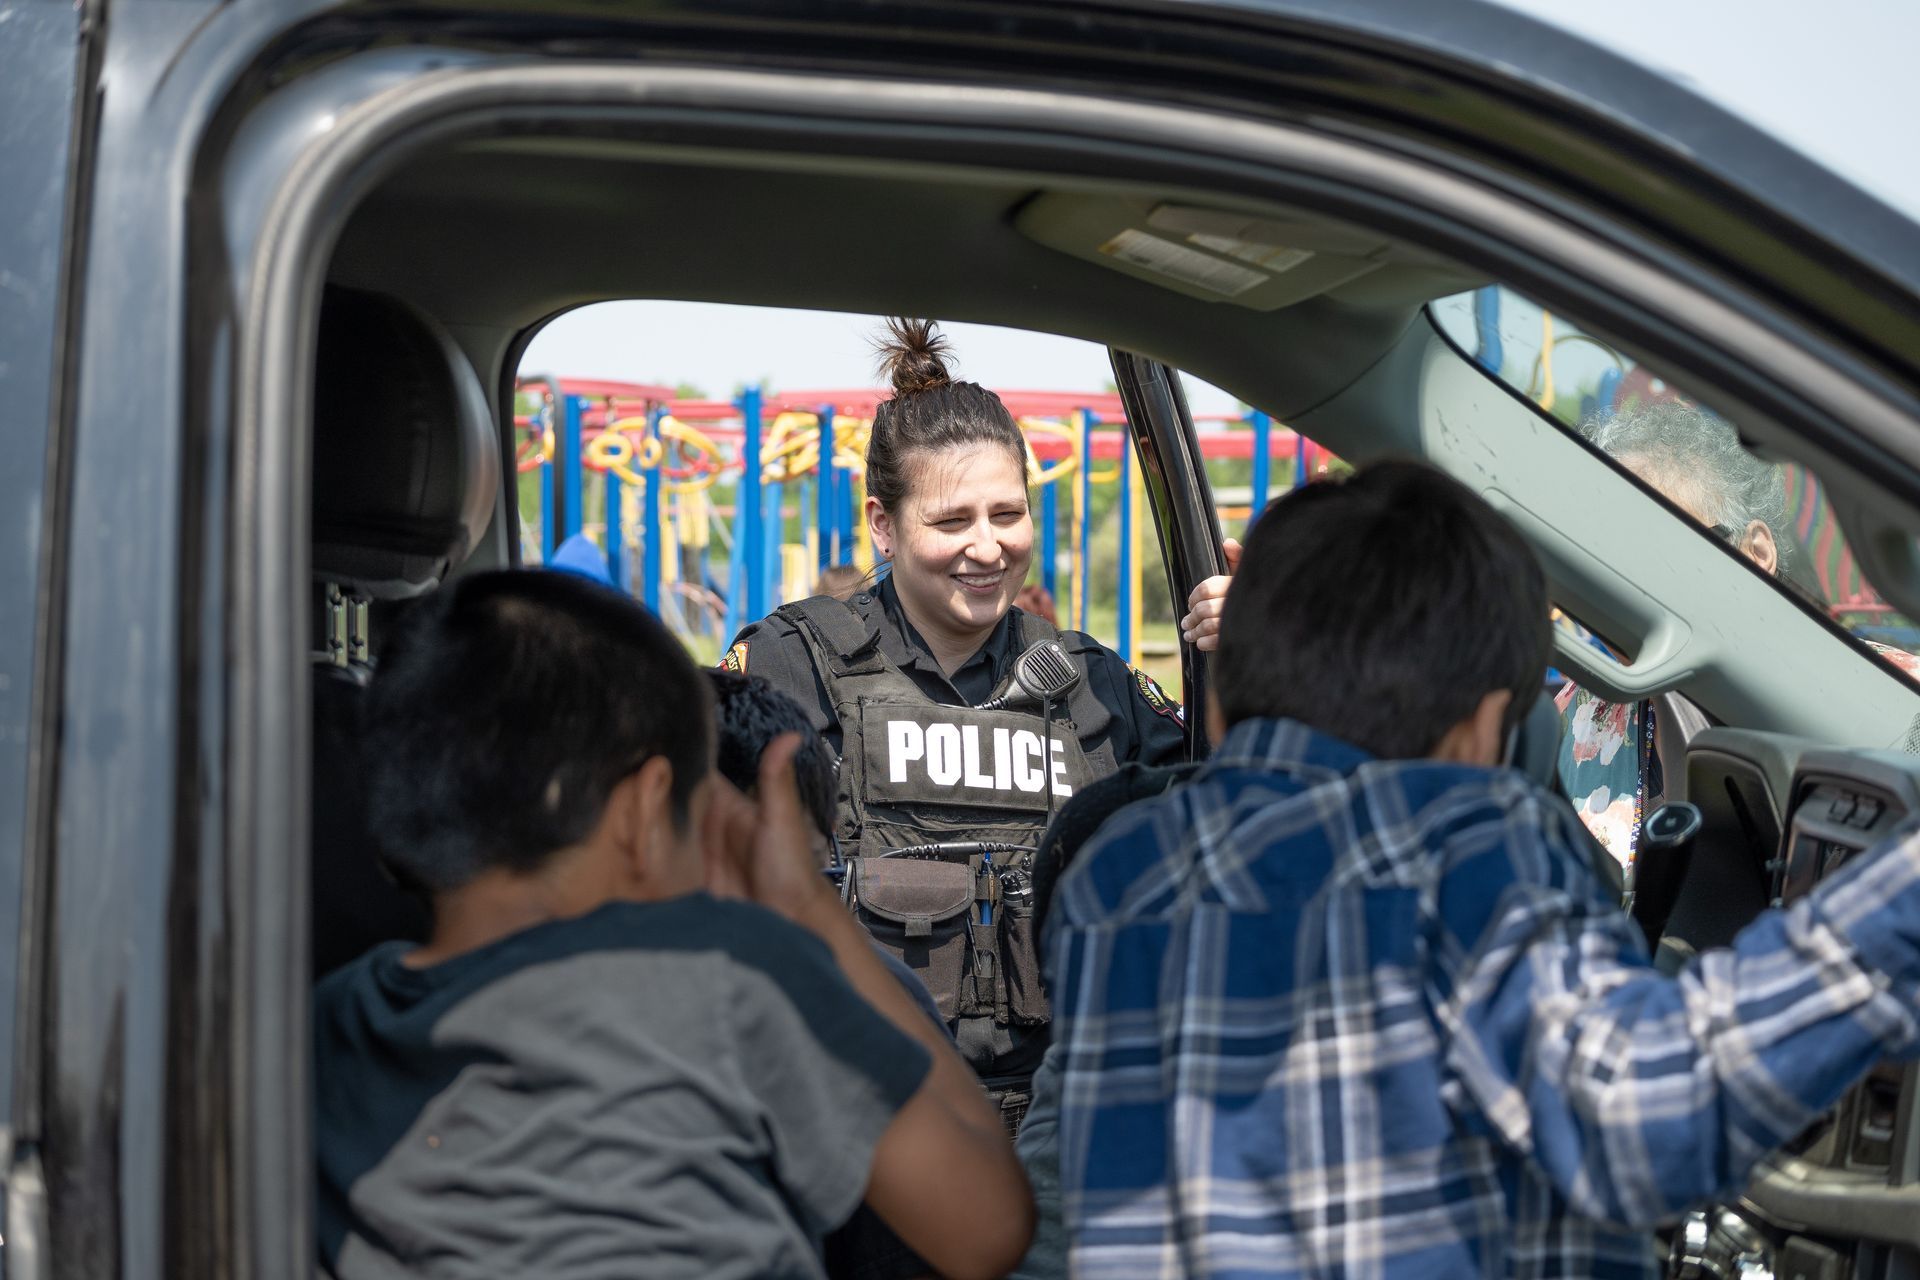 MFNPS-Manitoba First Nations Police Service - Female officer speaking to children